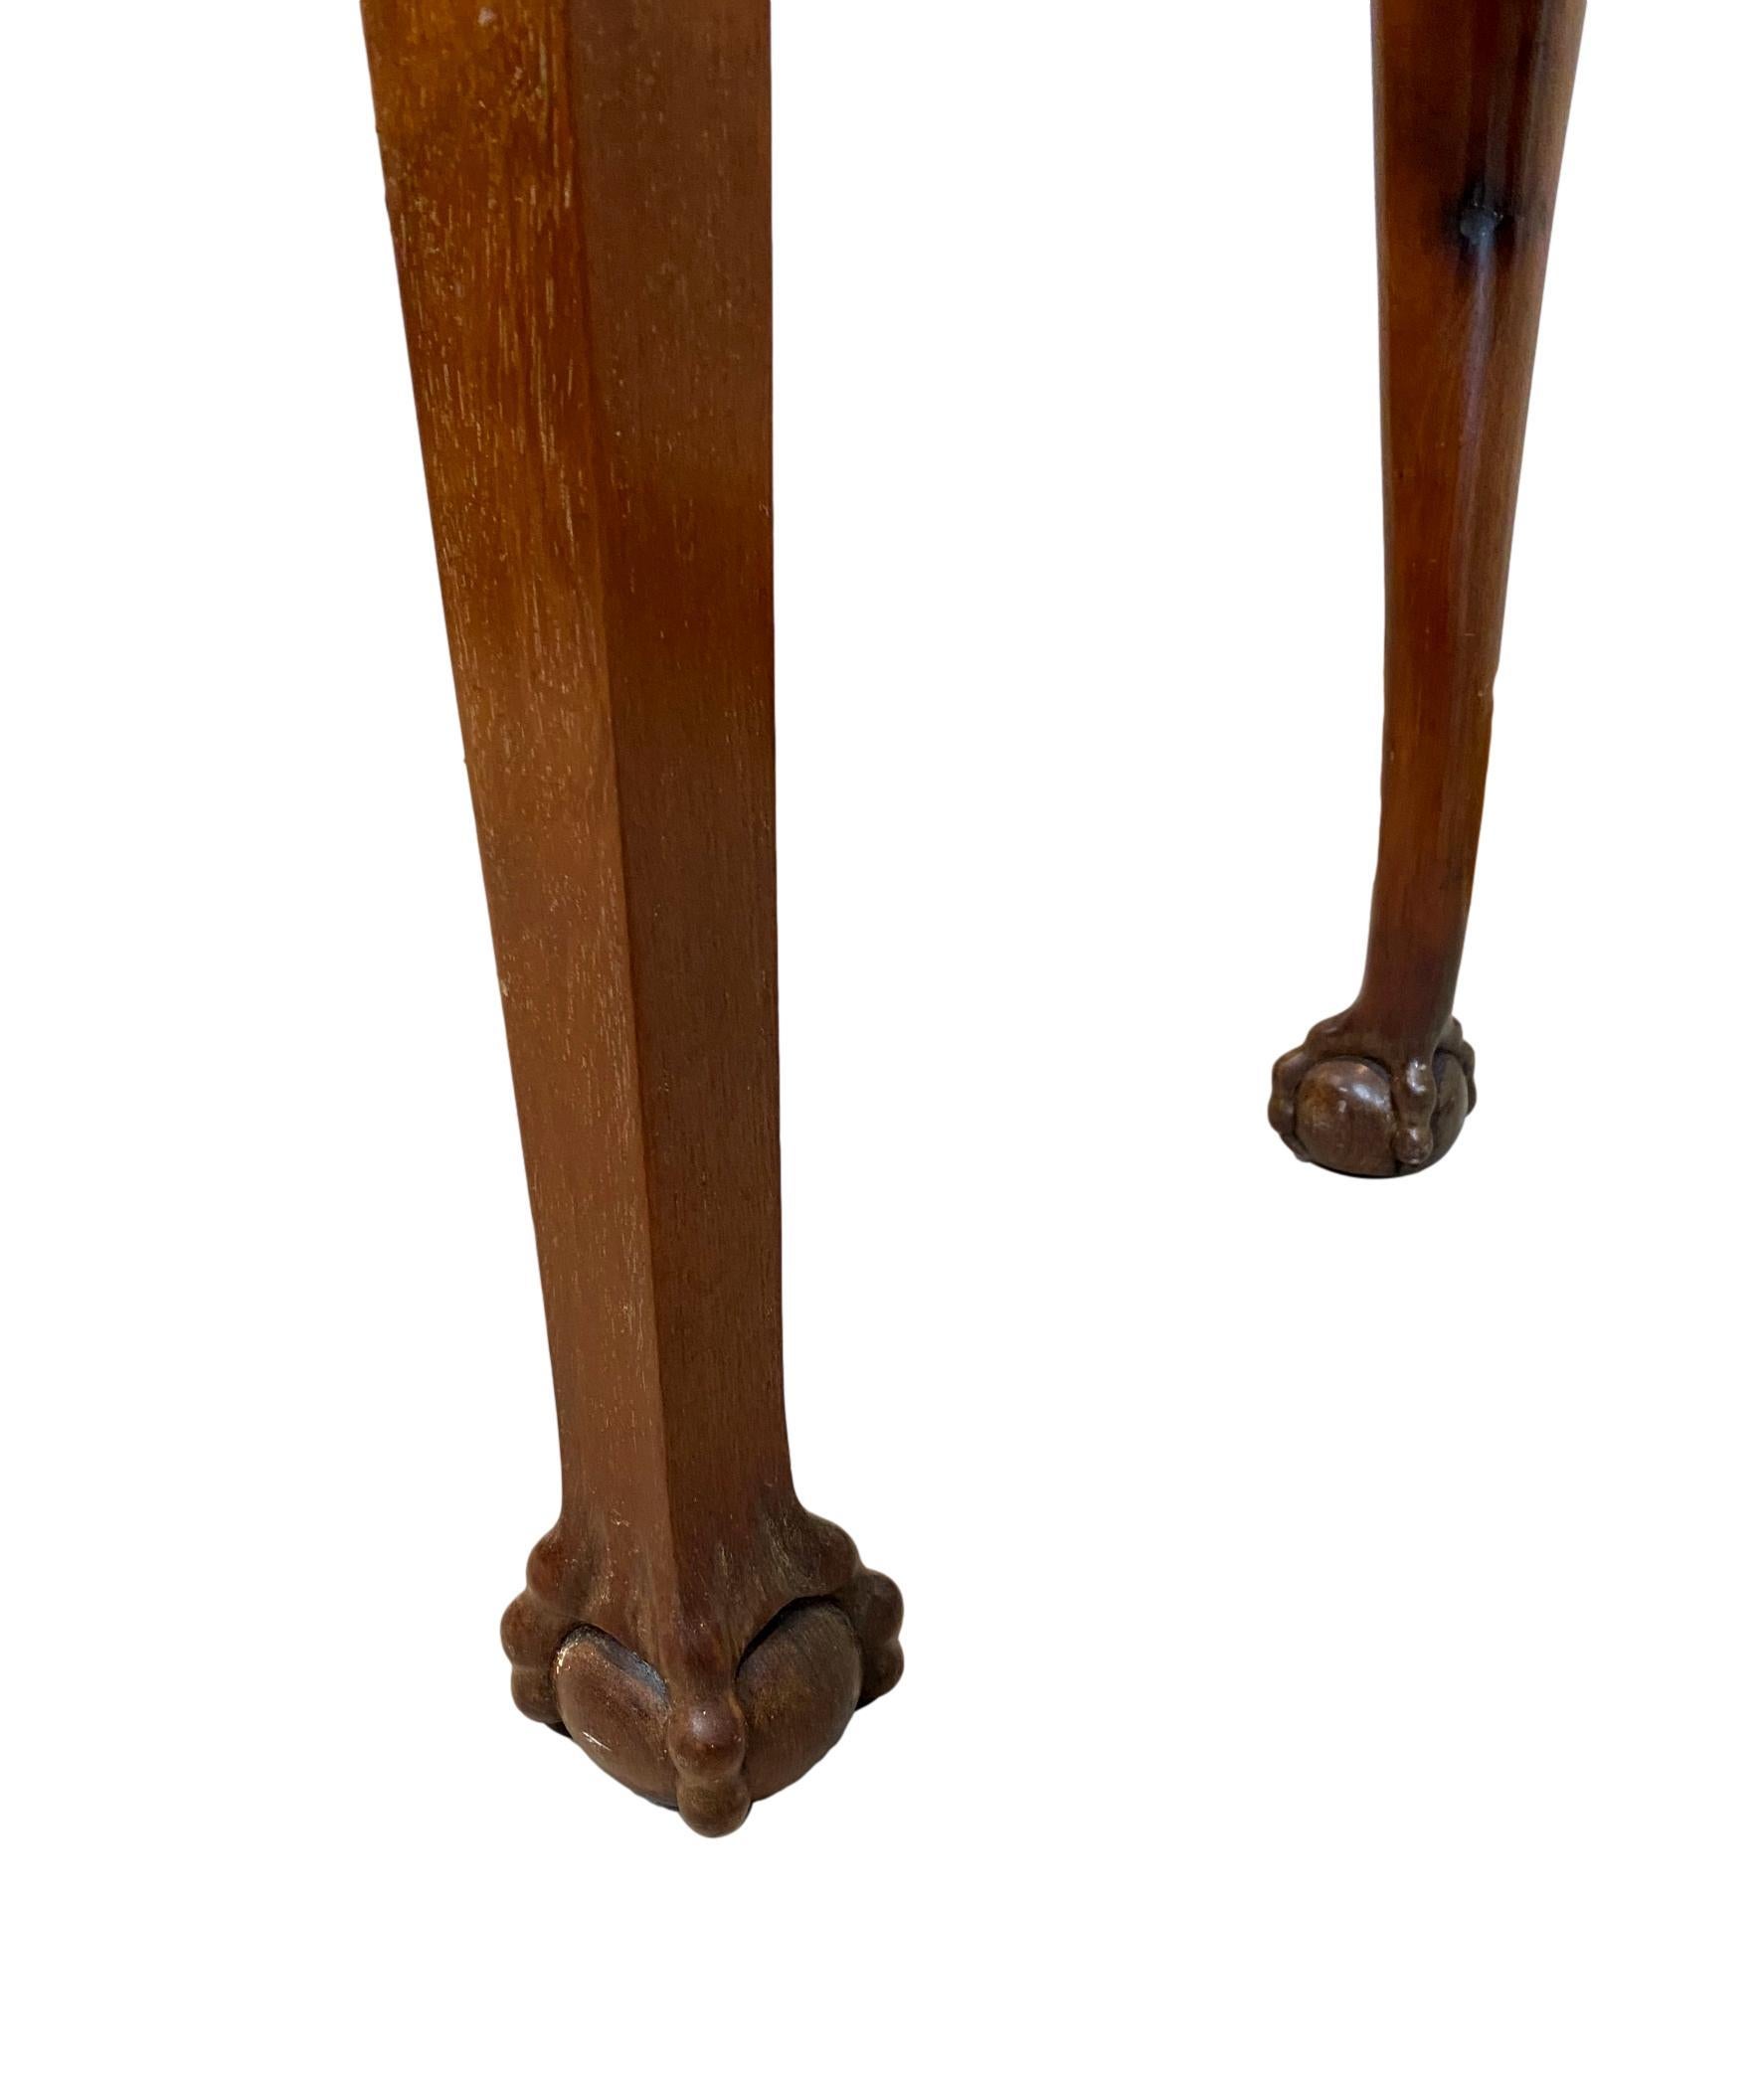 Chippendale Revival Mahogany Three-Drawer Console Table, English, circa 1880 For Sale 3